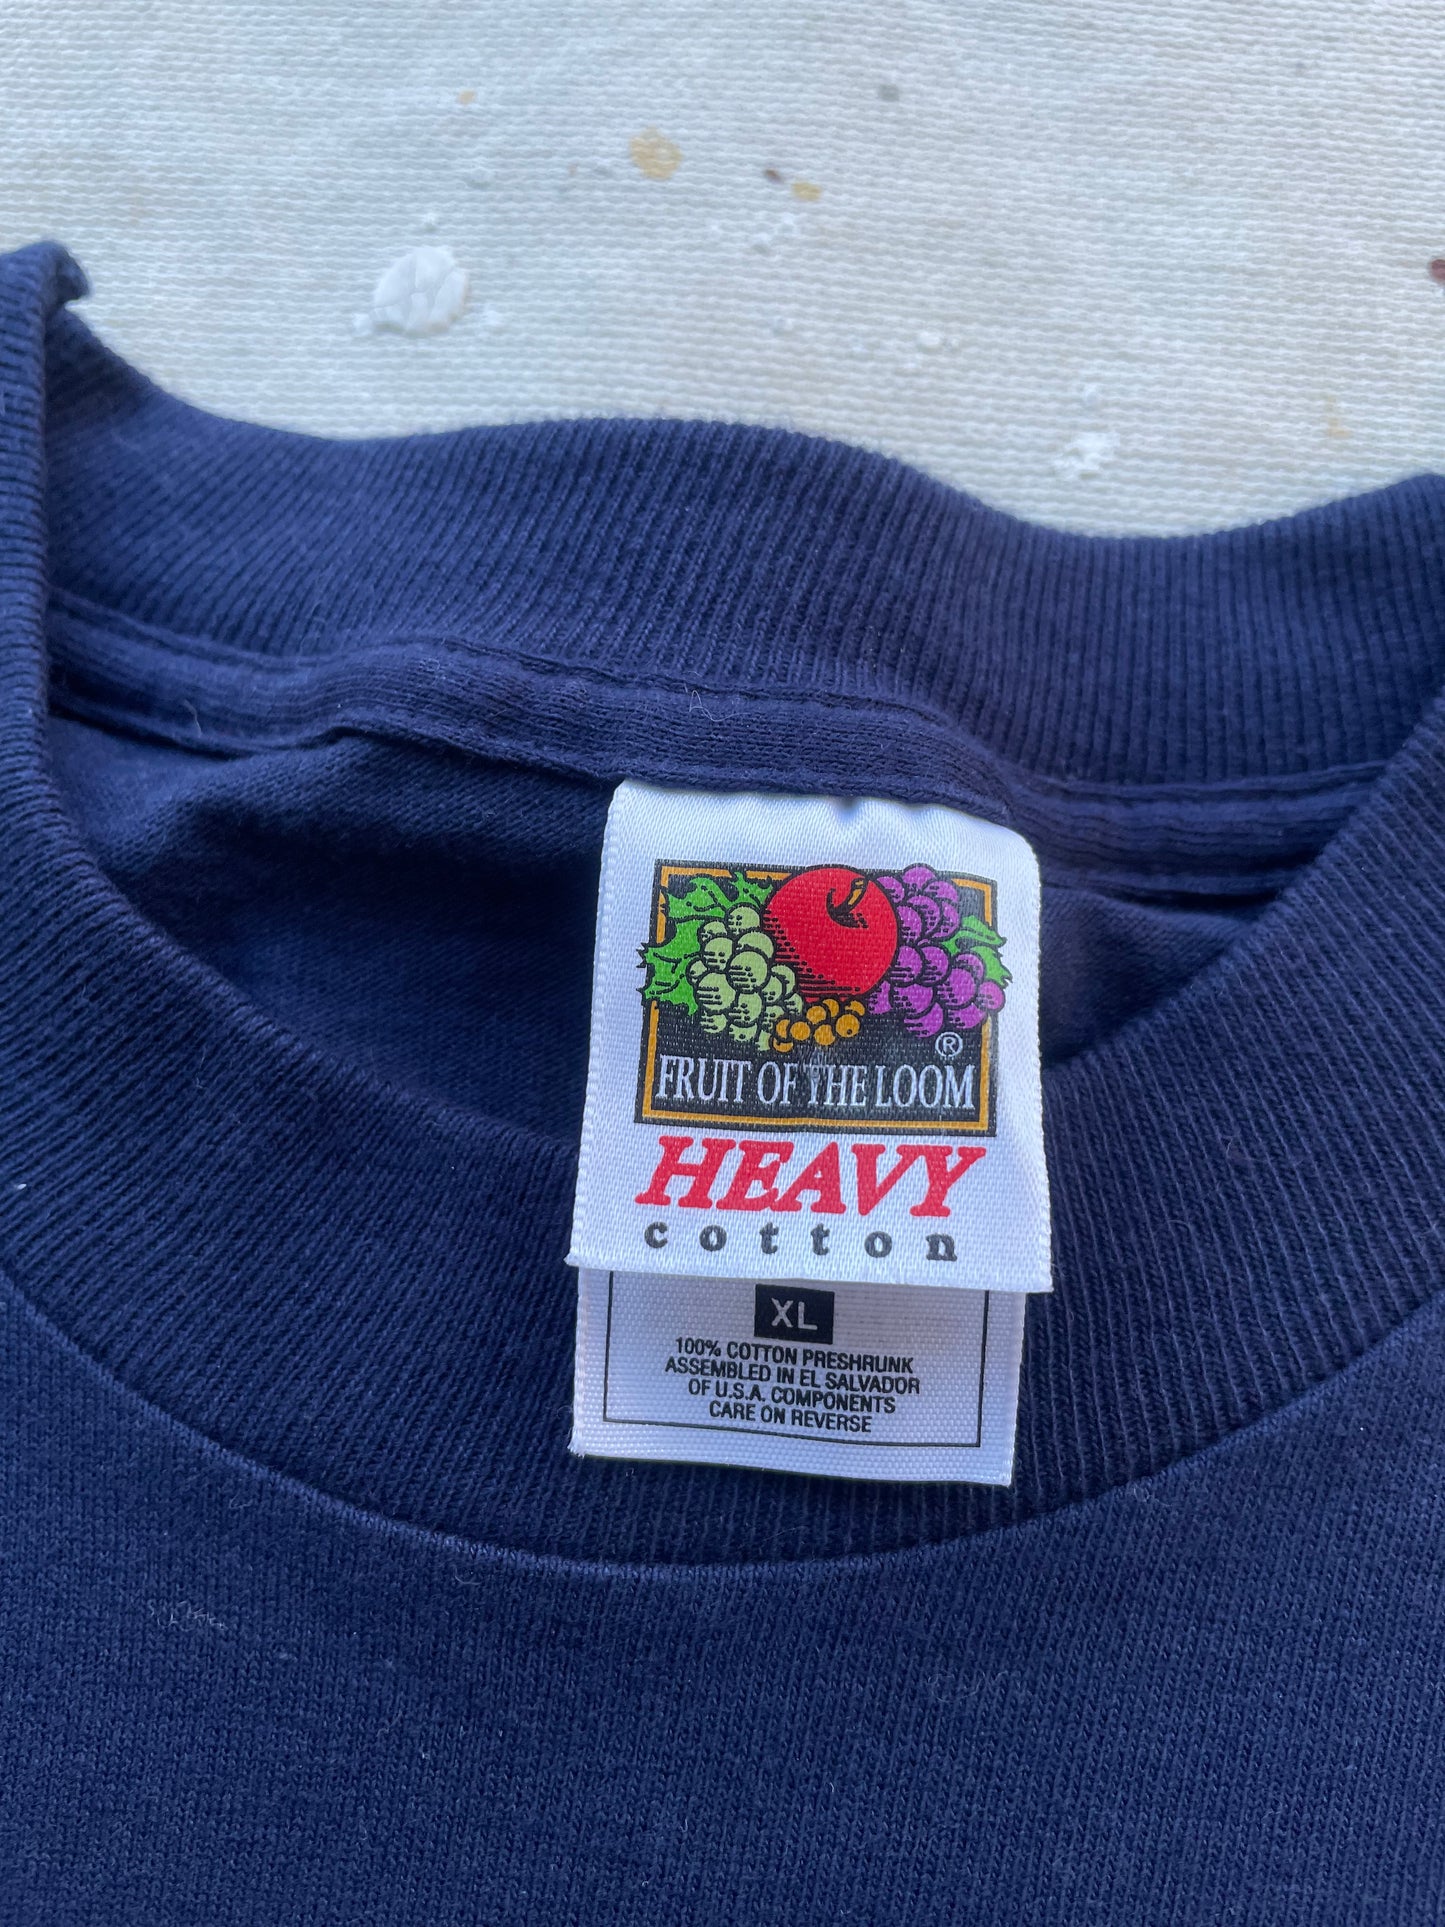 90’s Owned Beyond Hope Hacking Convention T-Shirt—[XL]